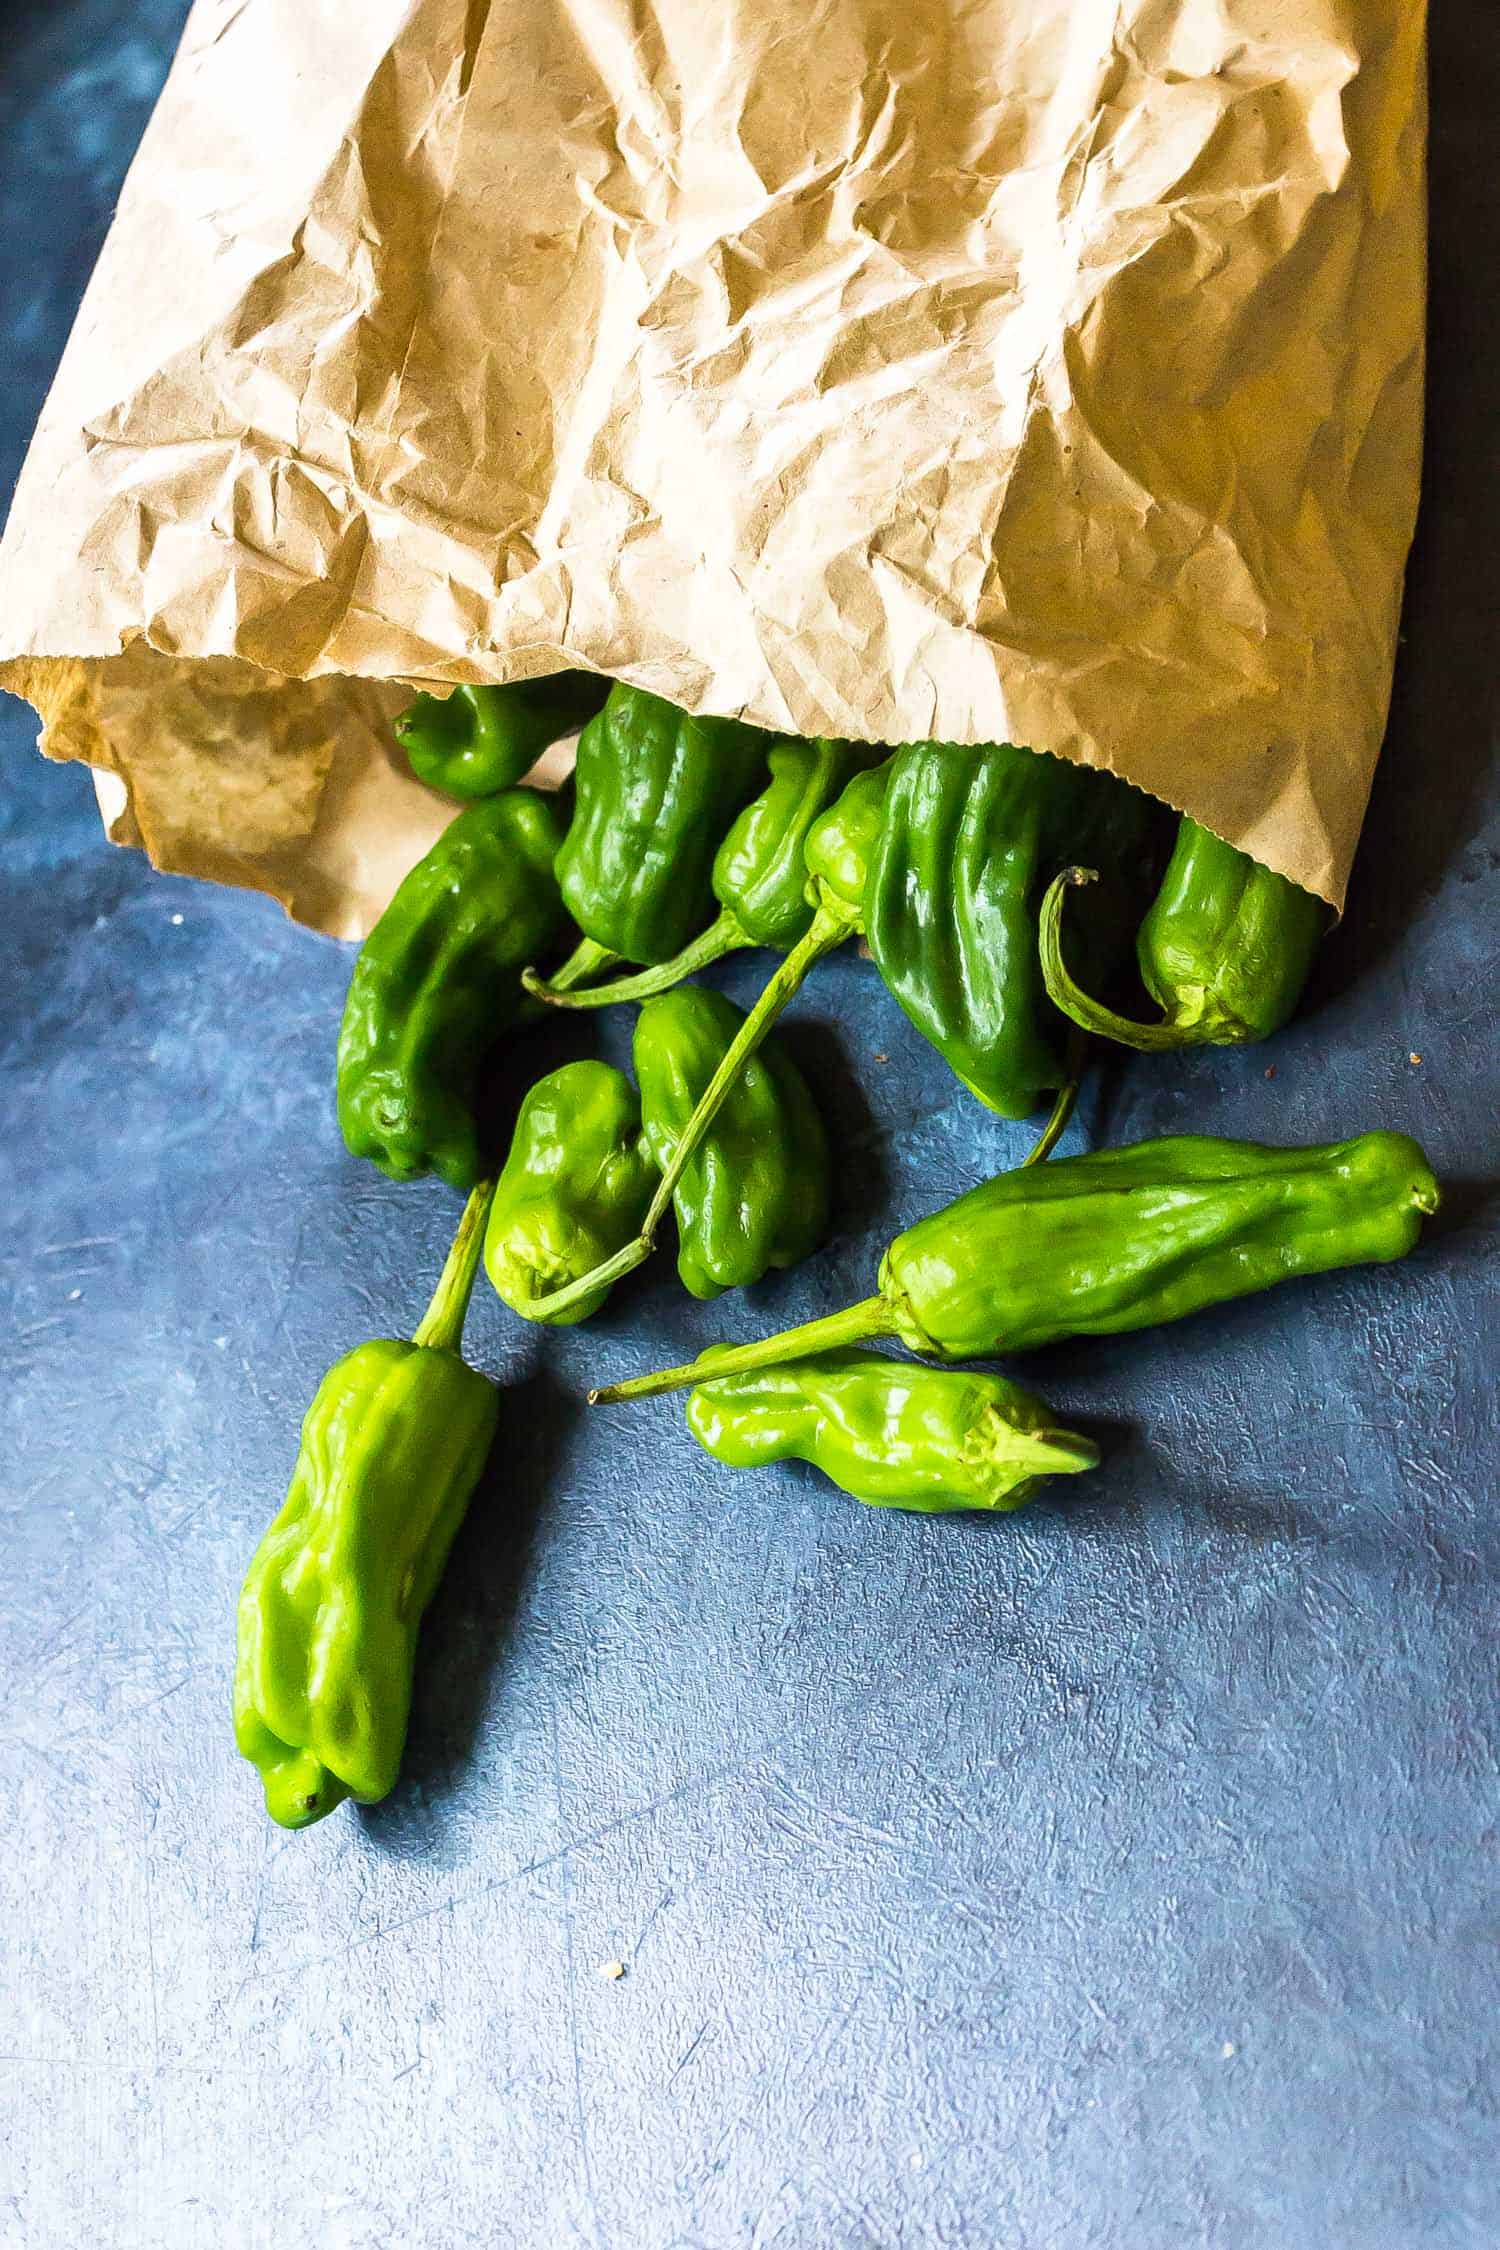 Shishito Peppers in a brown bag spilling out onto a blue background